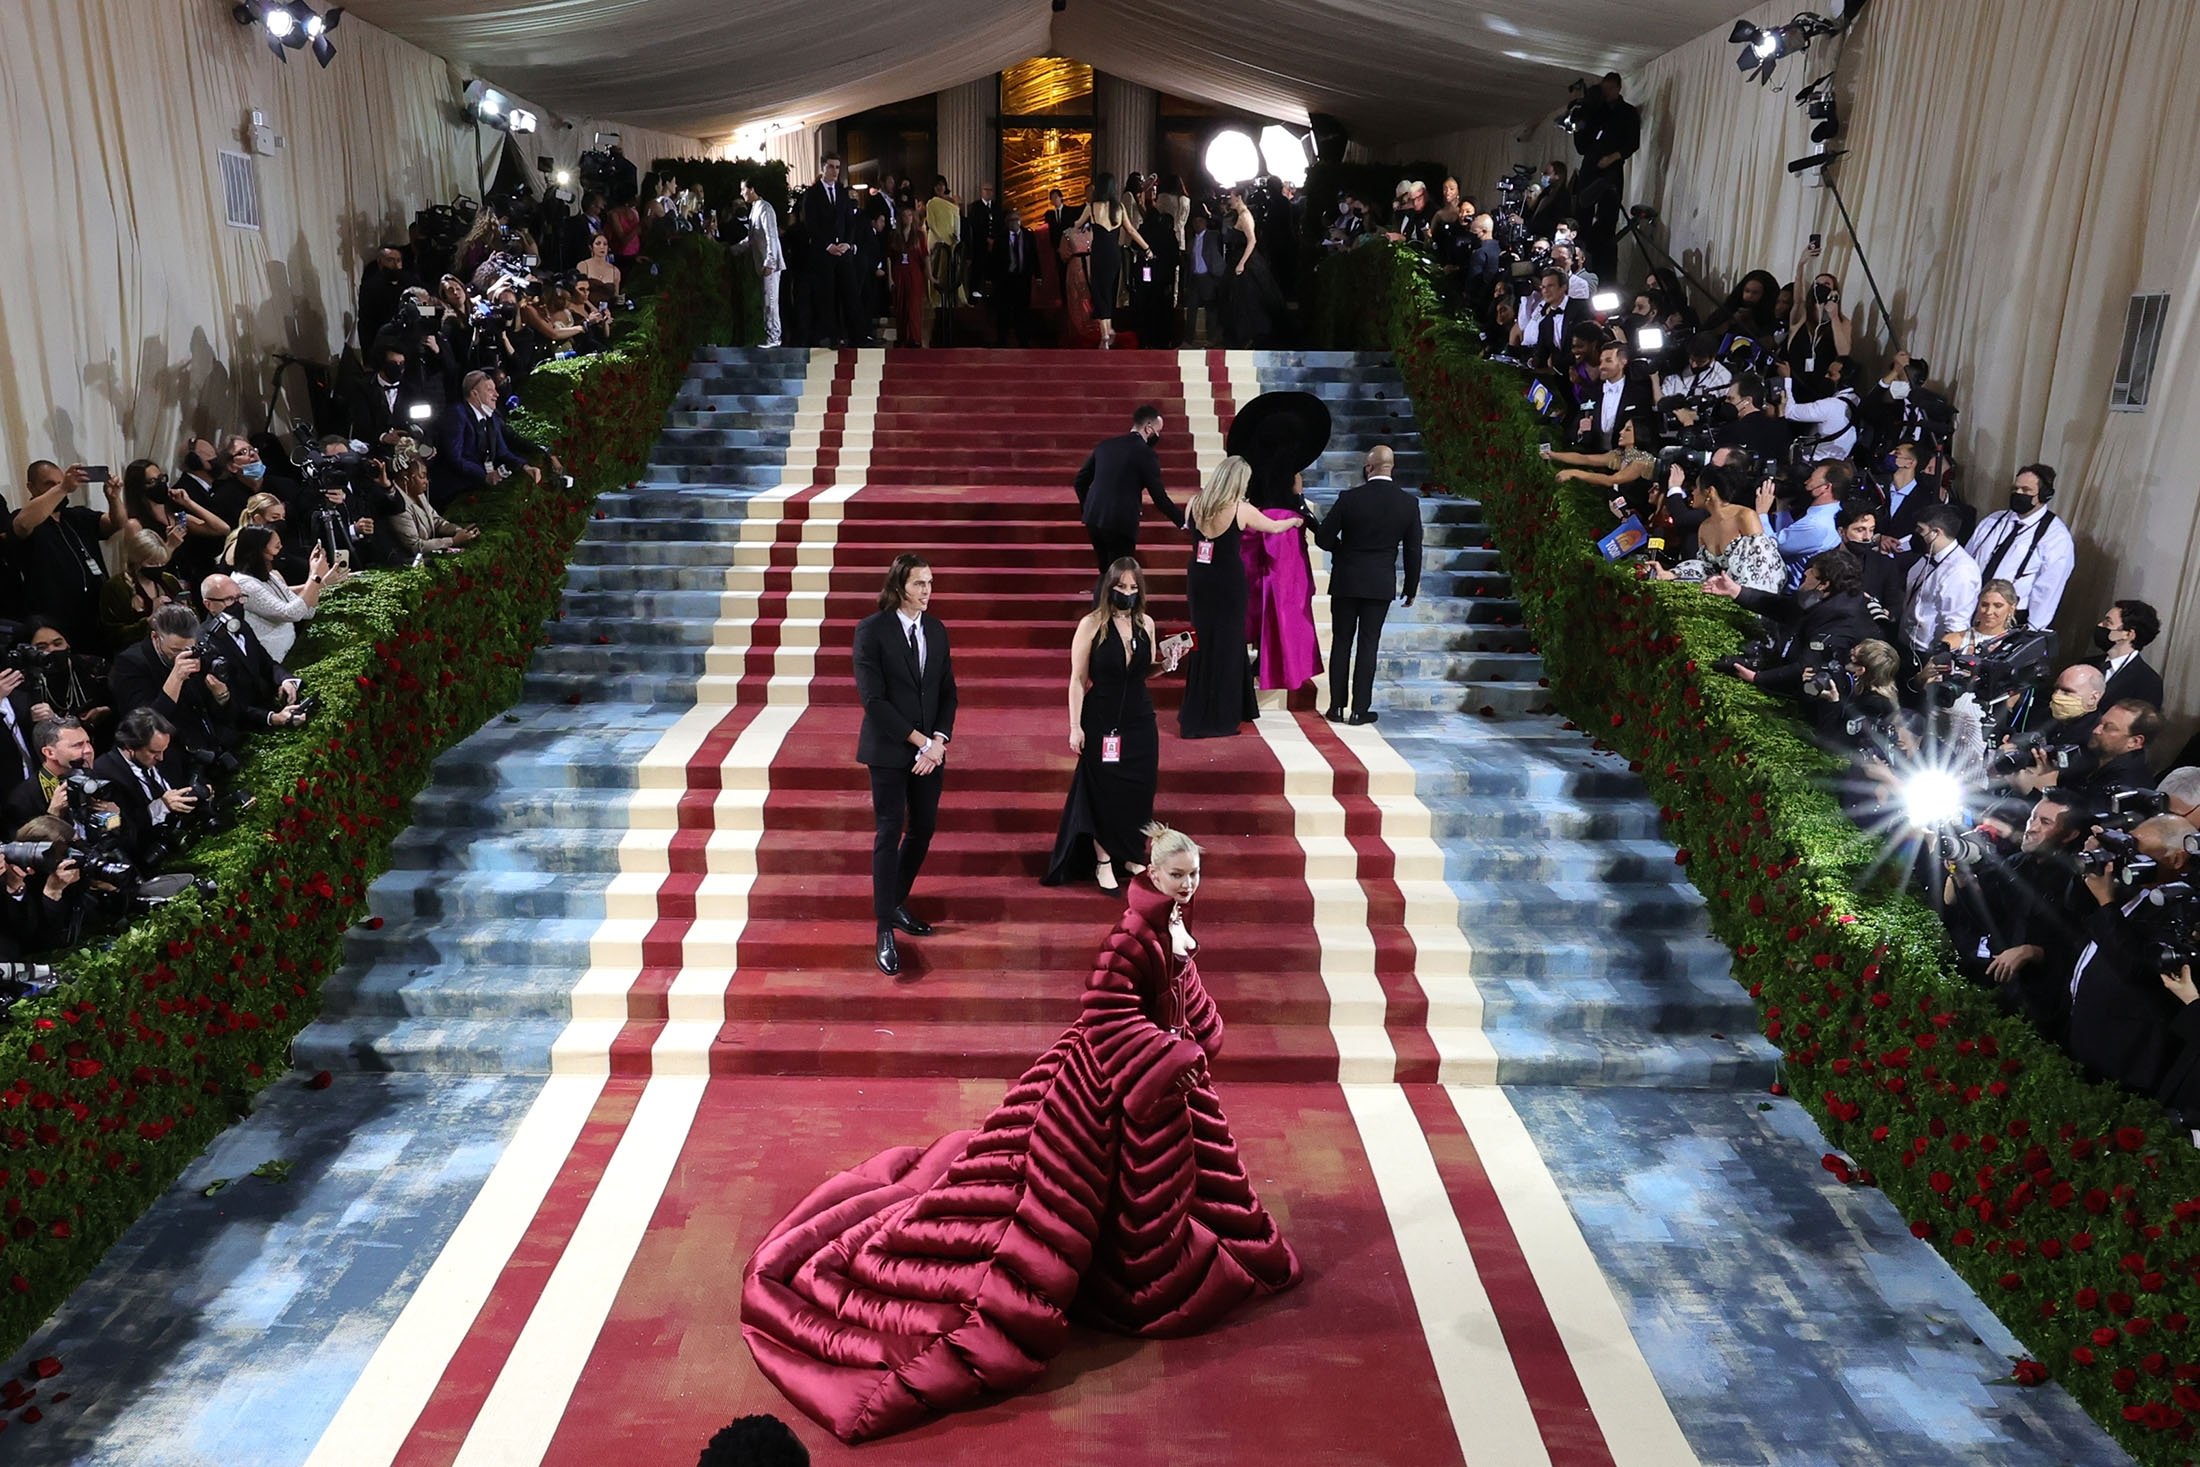 Fashion’s biggest night Met Gala approaches fast, here’s a guide